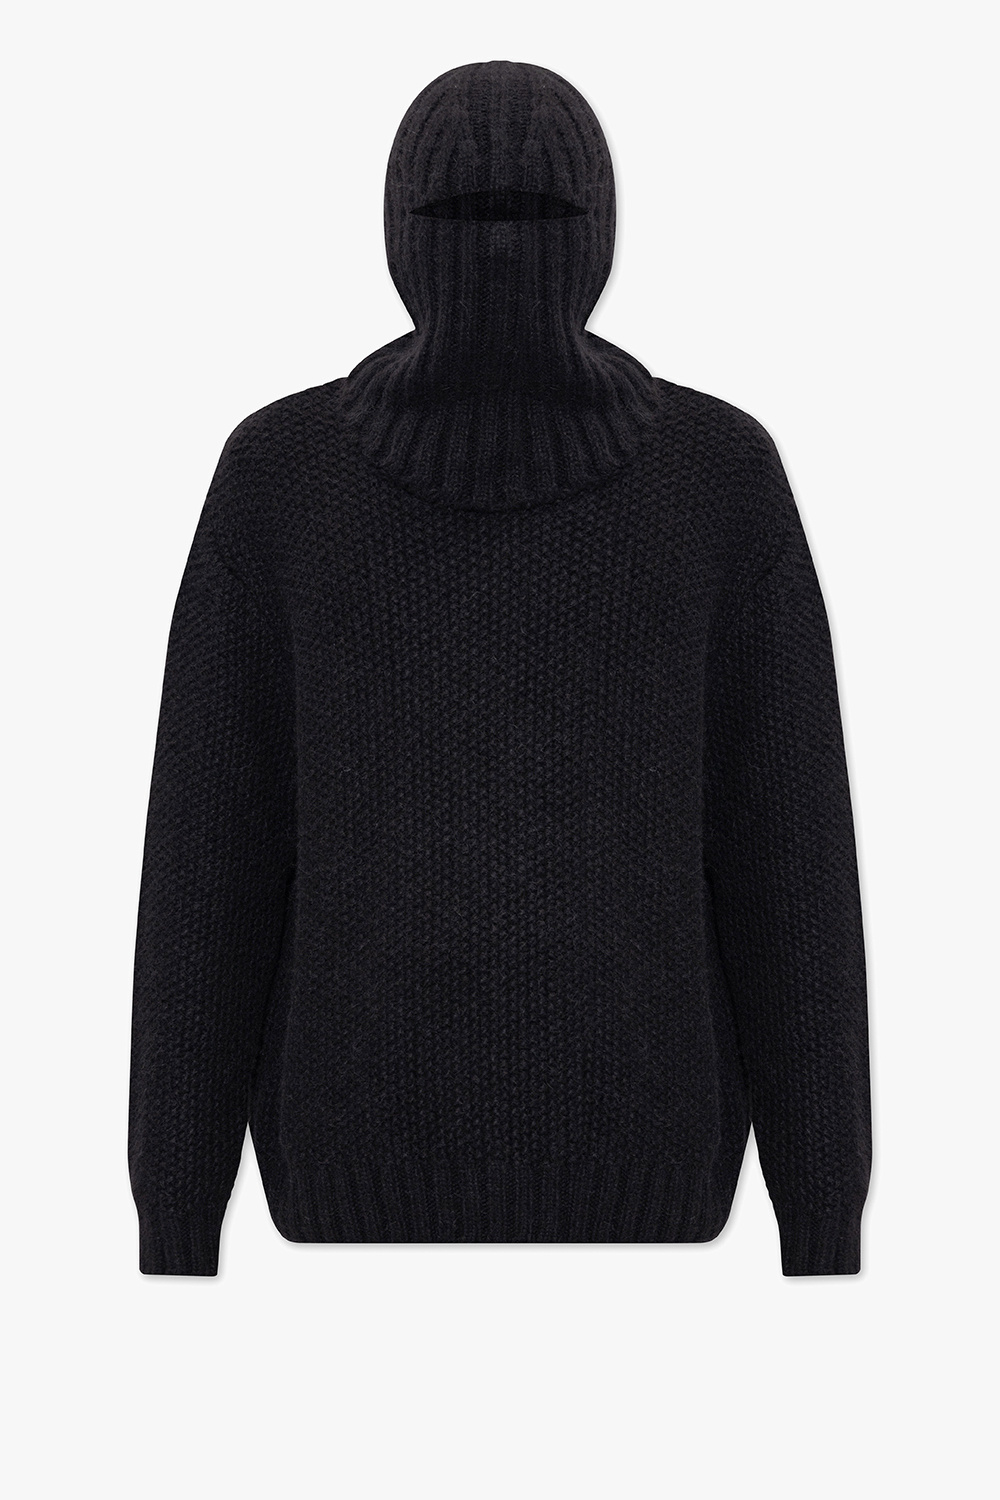 Givenchy Kids TEEN gradient logo jumper - Sweater with balaclava Givenchy -  IetpShops Bulgaria